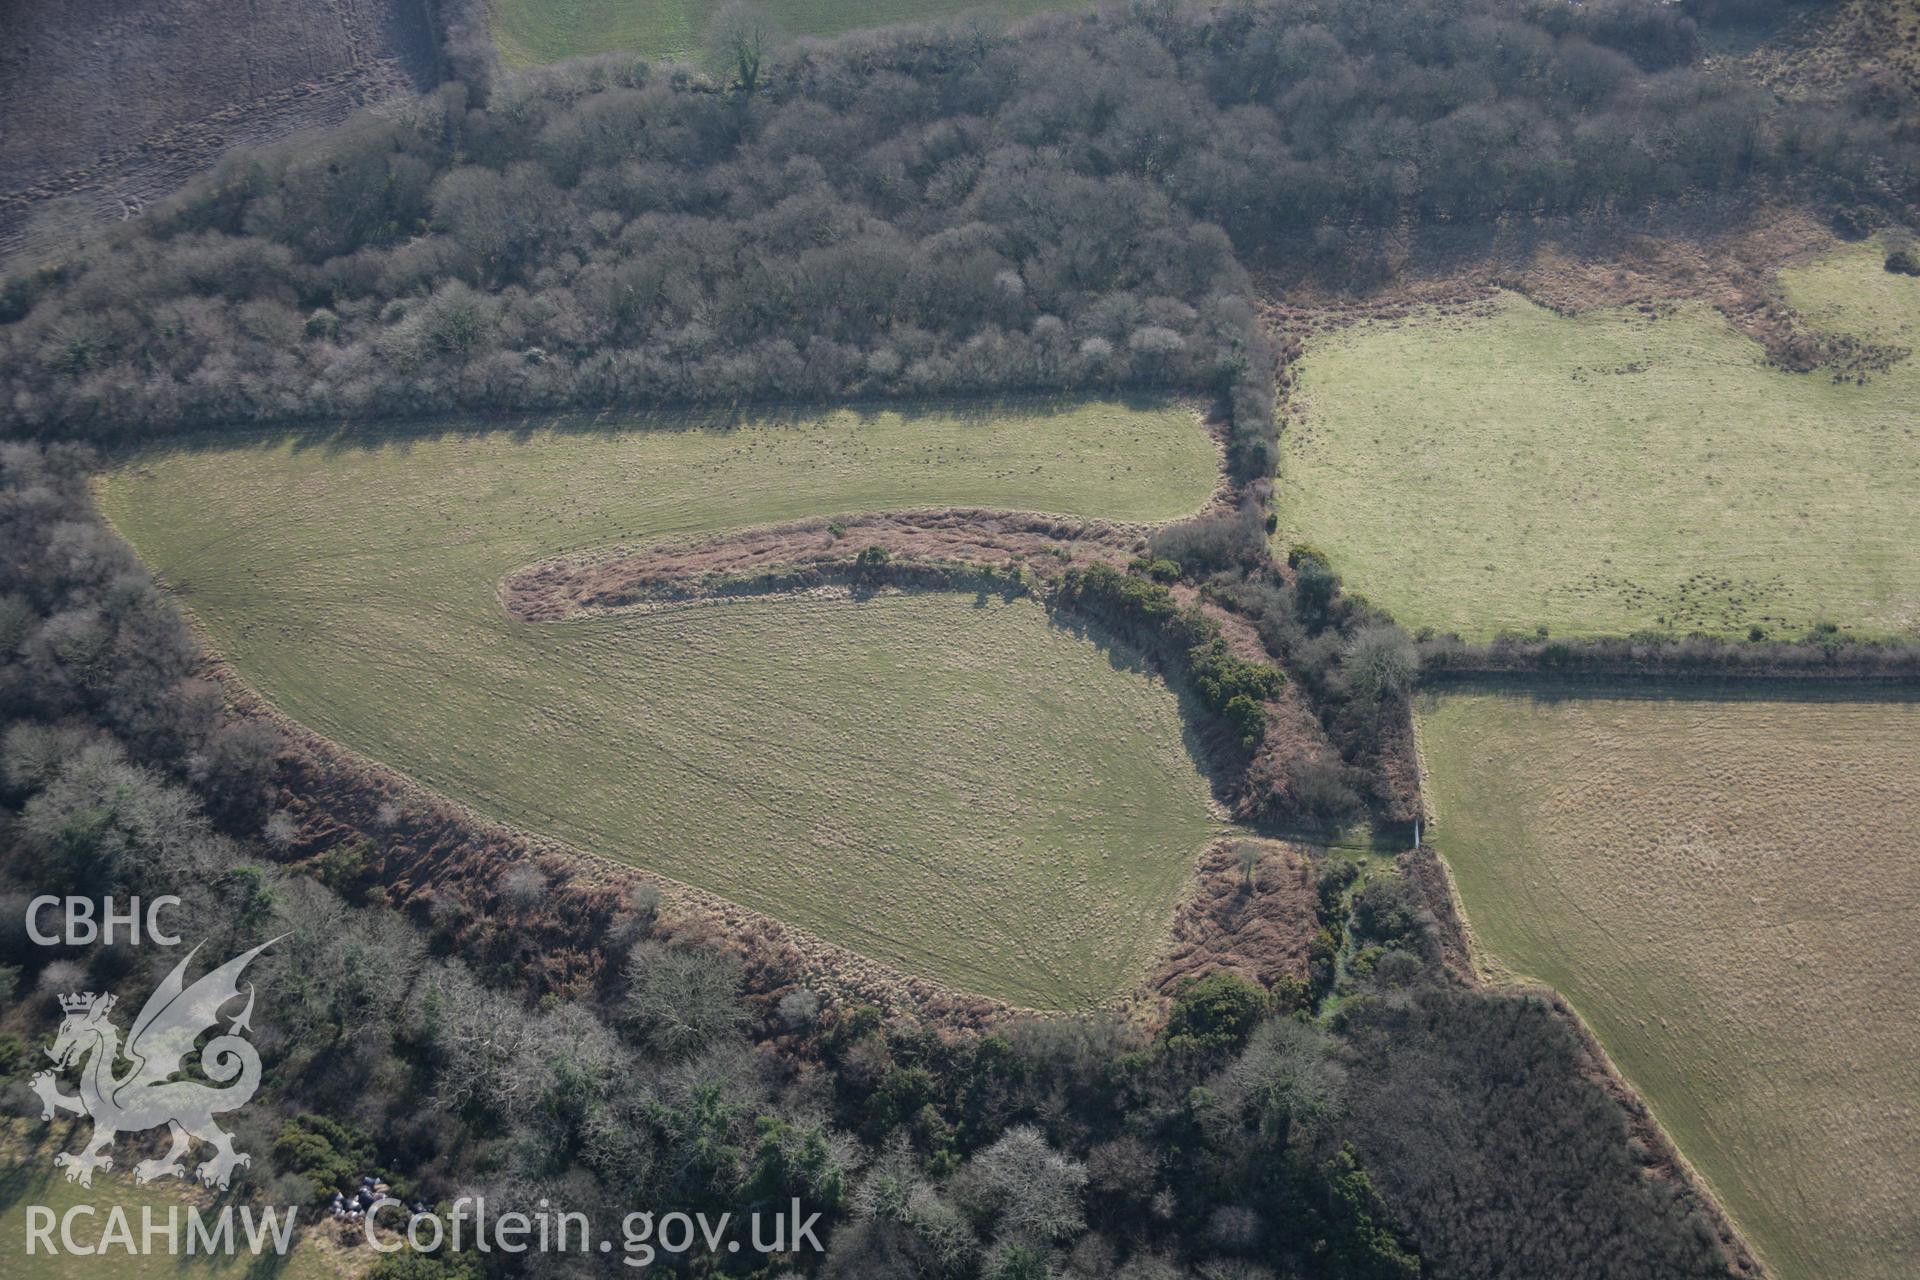 RCAHMW colour oblique aerial photograph of promontory fort at Lamborough Camp, viewed from the north. Taken on 26 January 2006 by Toby Driver.